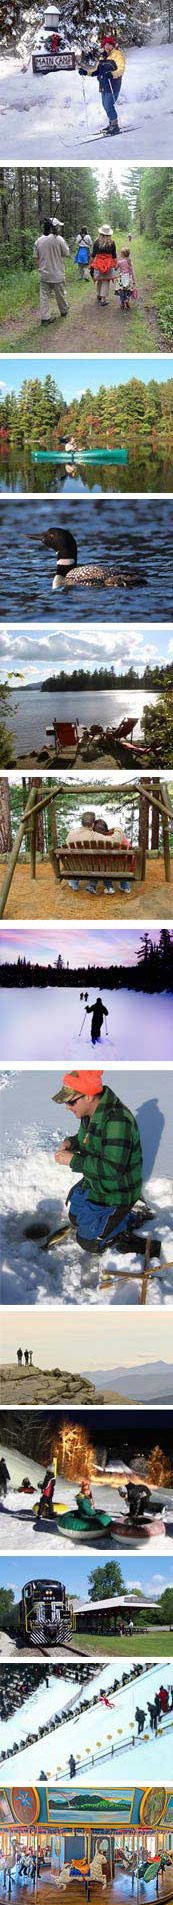 Adirondack Birding Fly Fishing, Boating  Attractions Ski Jouring Cross Country Skiing Snowshoeing